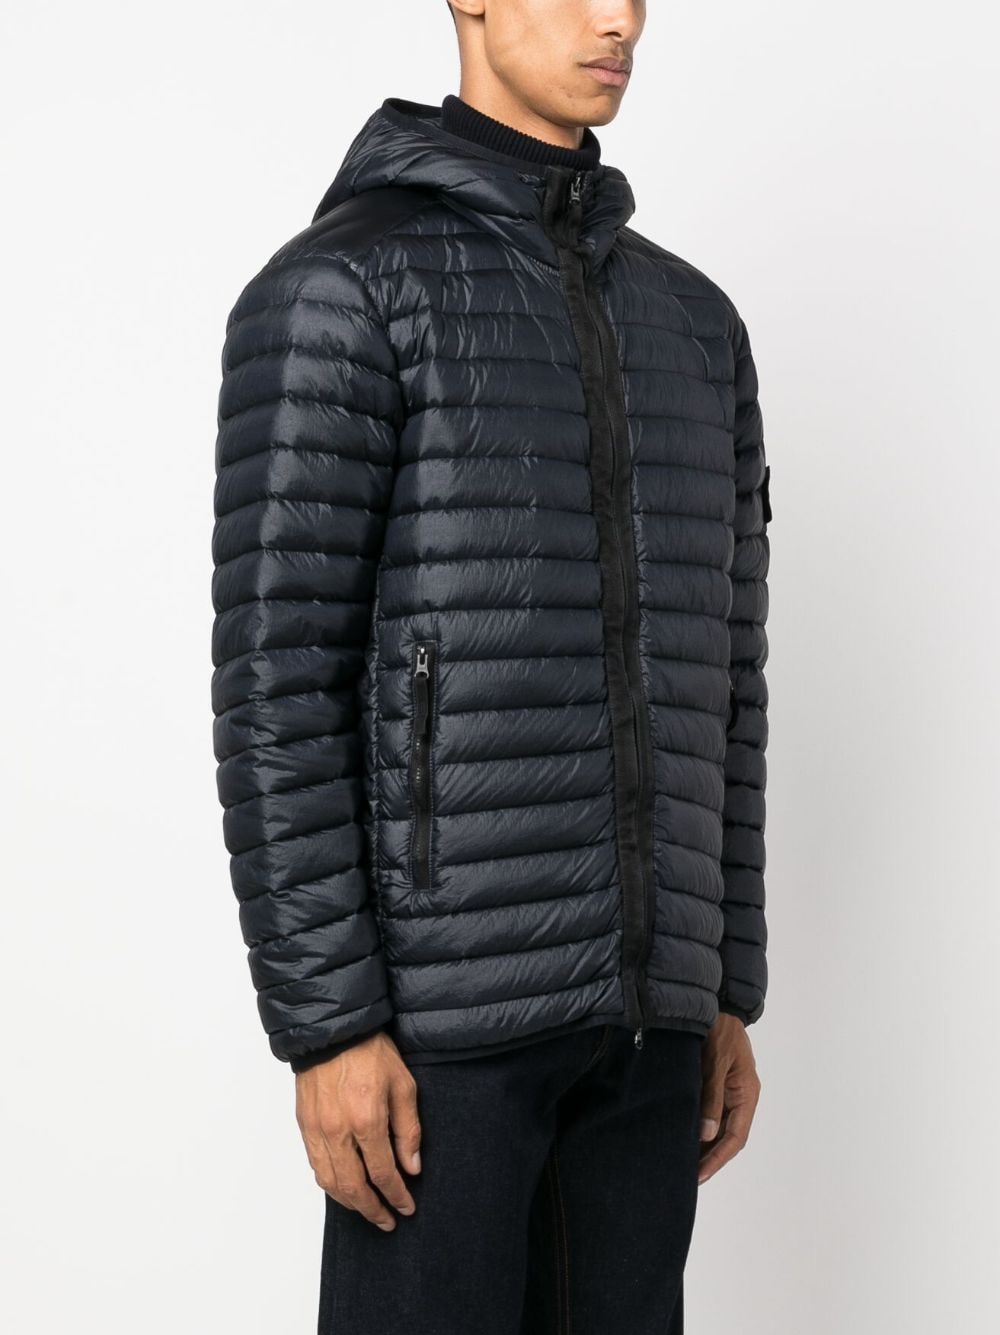 STONE ISLAND Men's Packable Lightweight Down Jacket with Hood - Navy